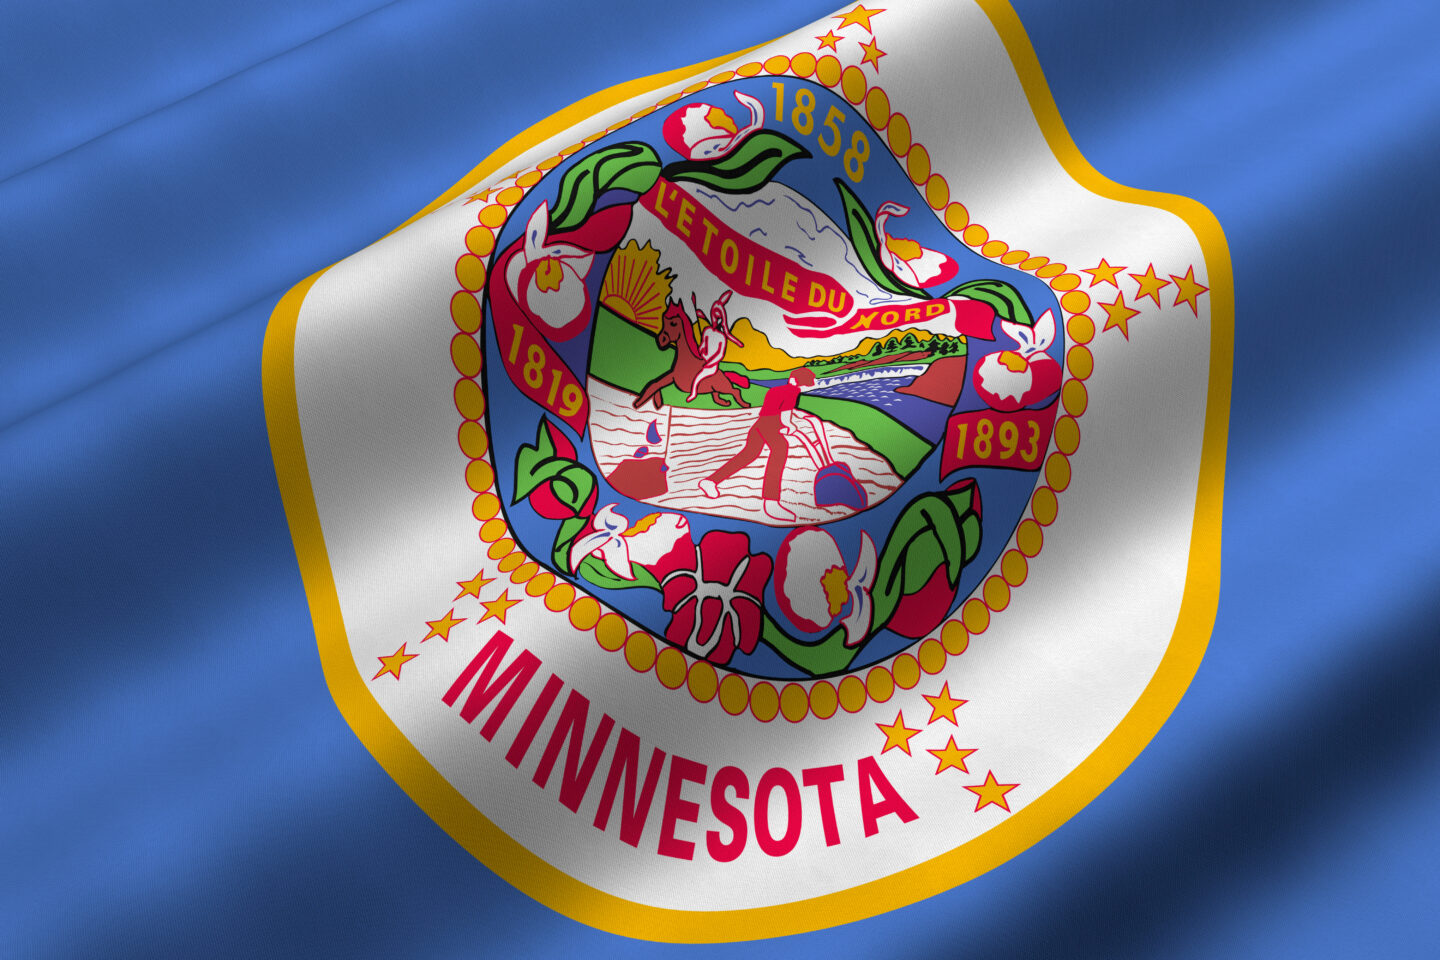 Minnesota Becomes 23rd State To Legalize Recreational Cannabis